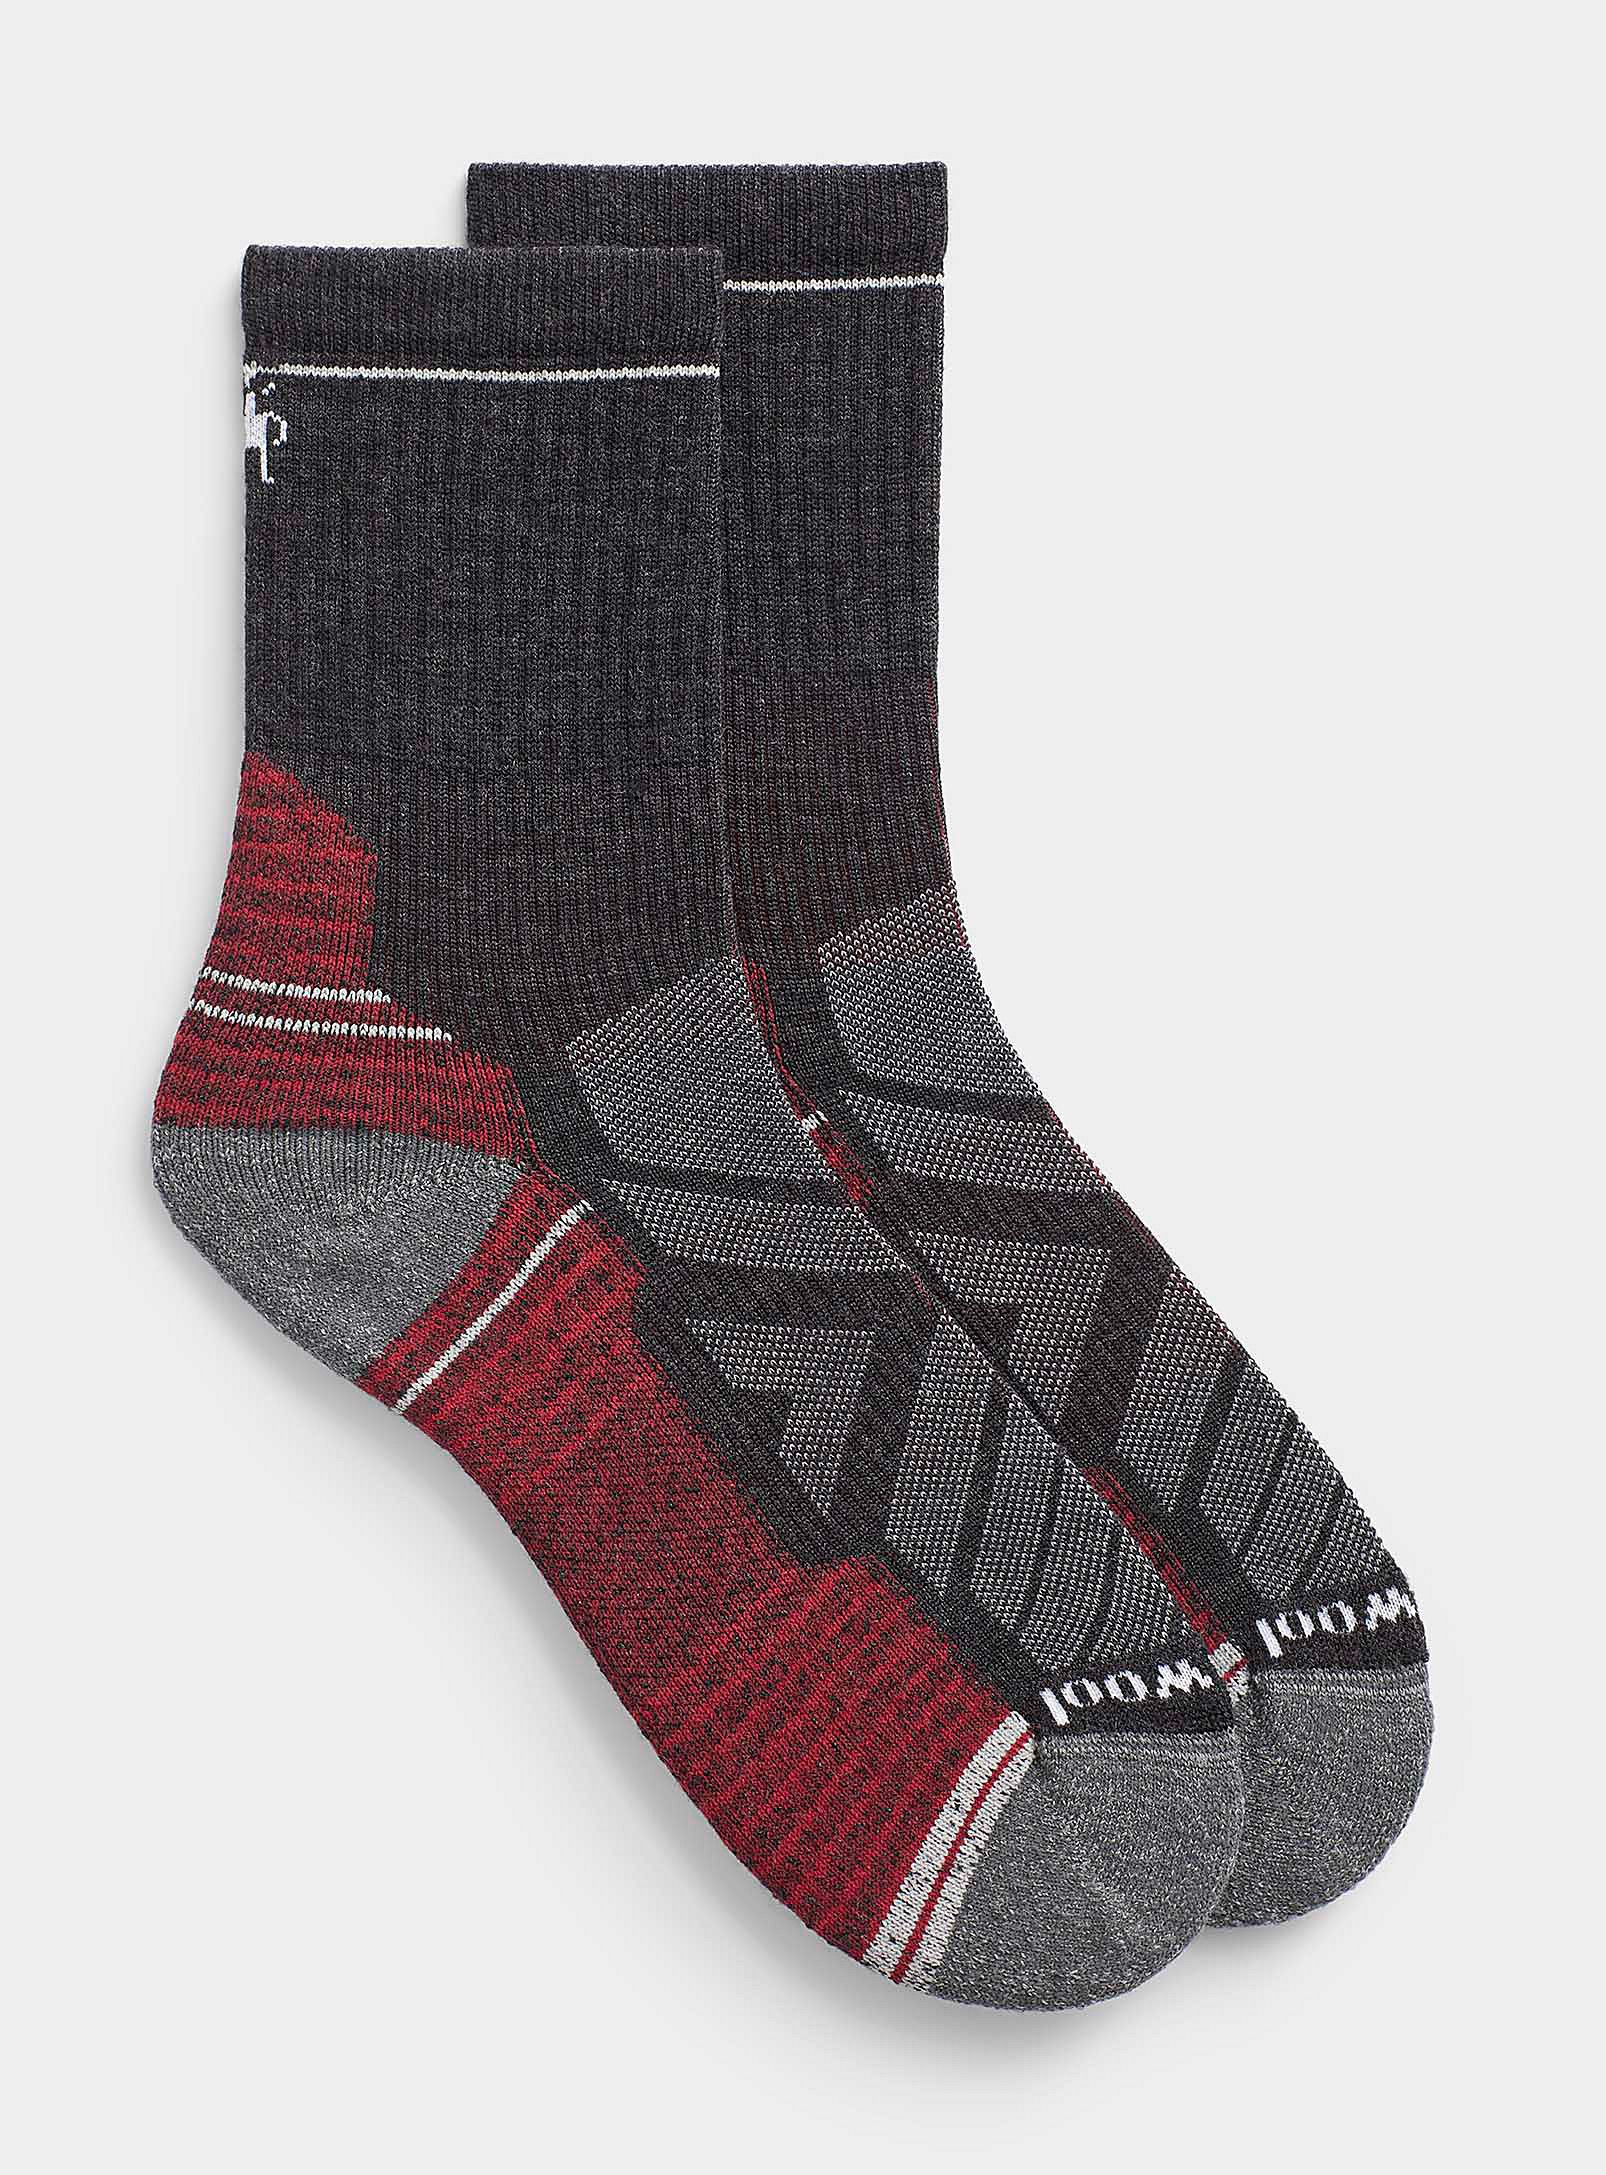 Smartwool - Men's Grey-and-red hiking sock